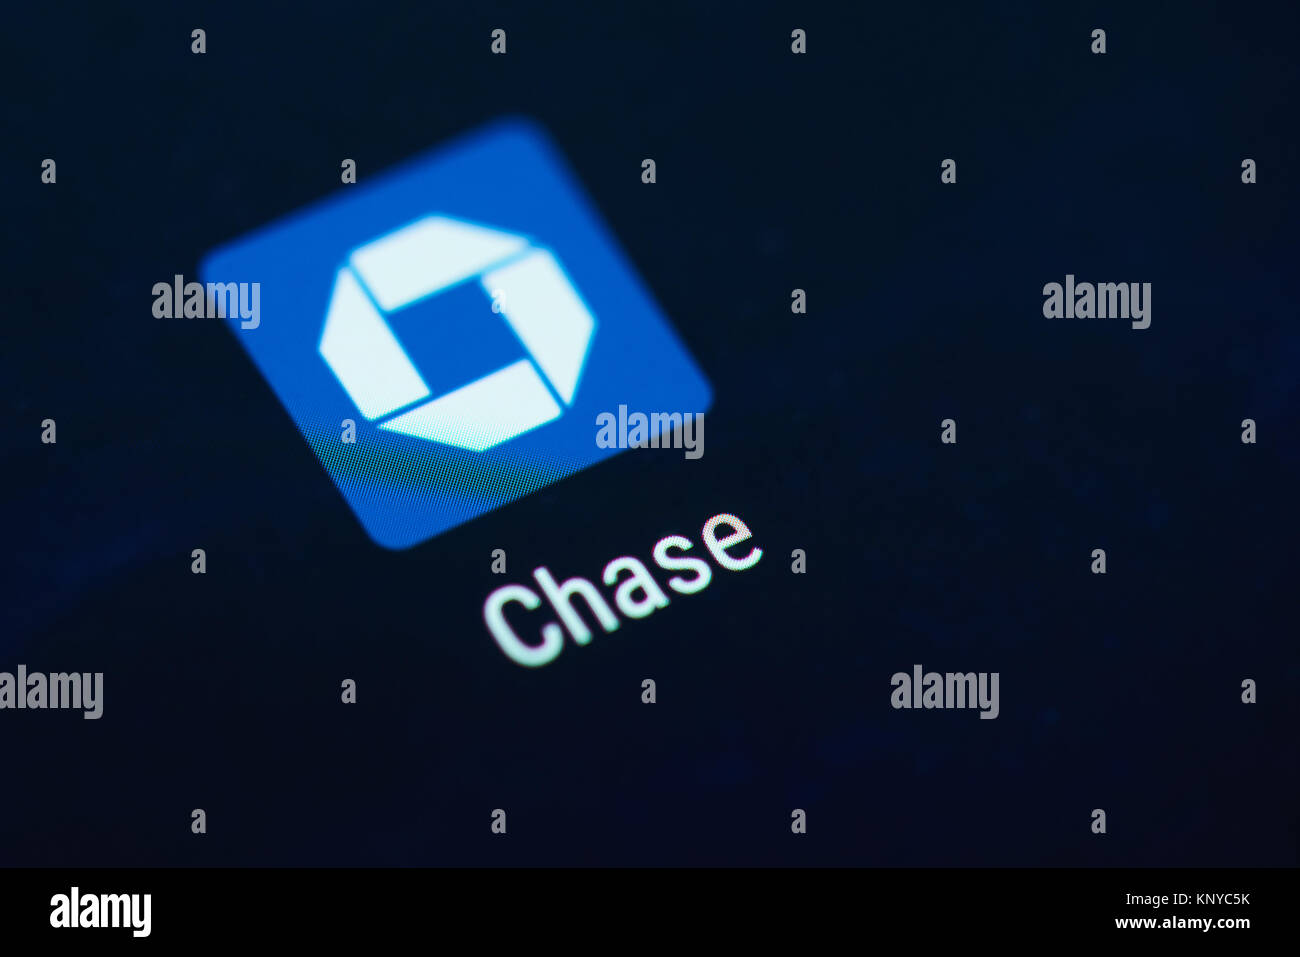 New york, USA - December 12, 2017: Chase bank application icon on smartphone screen close-up. Chase bank app icon with copy space on screen Stock Photo